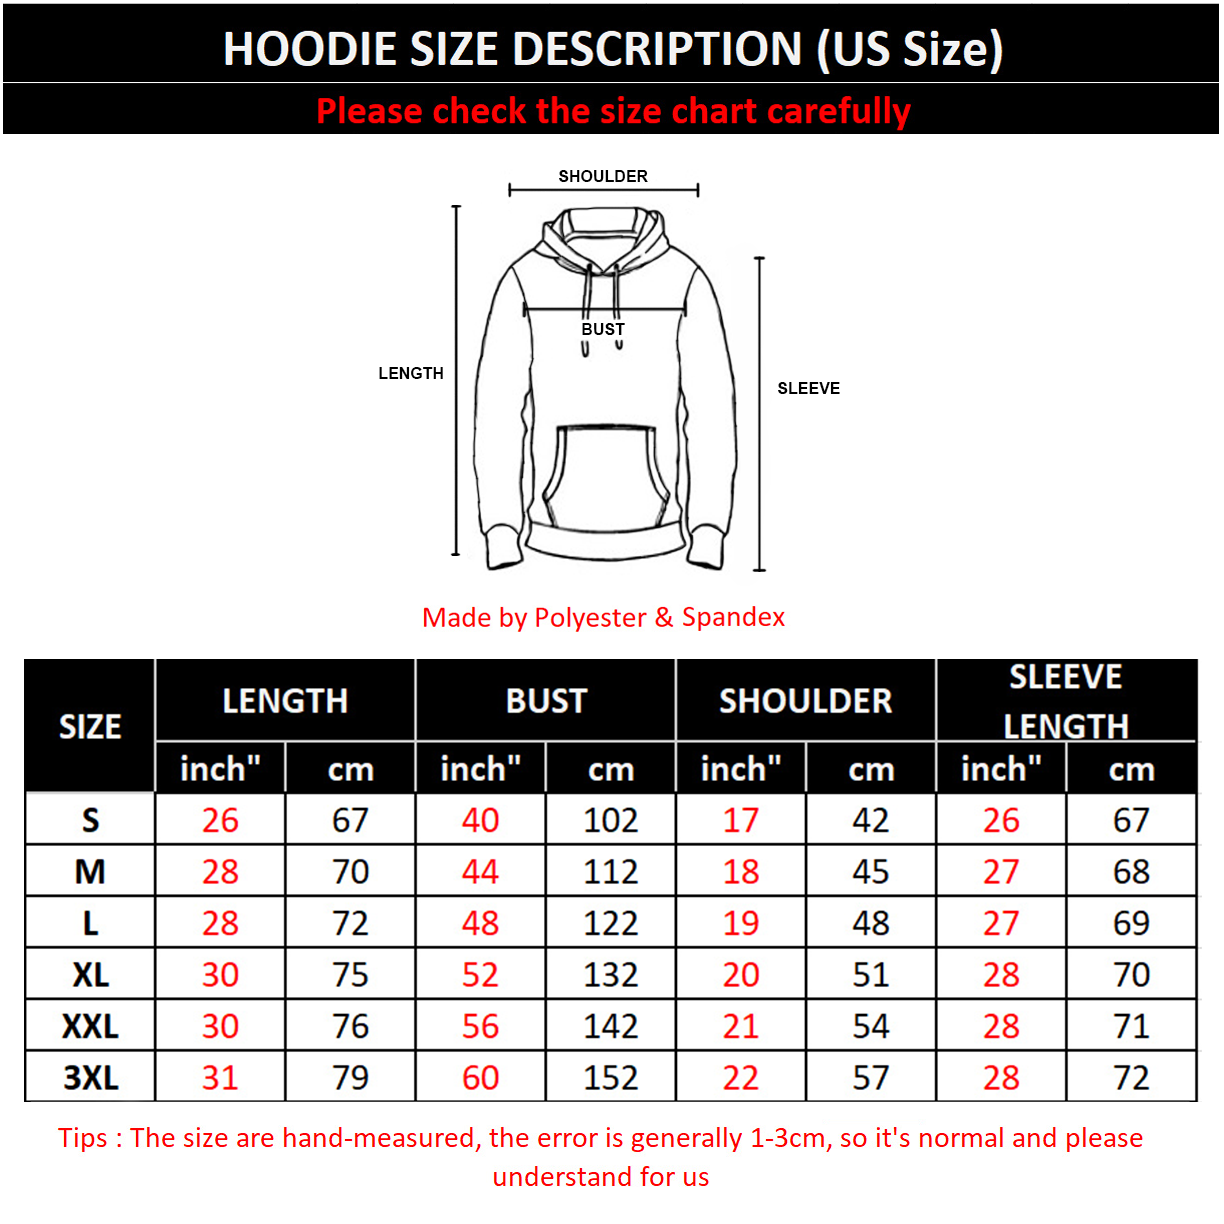 Horse Hoodie - All Over V8